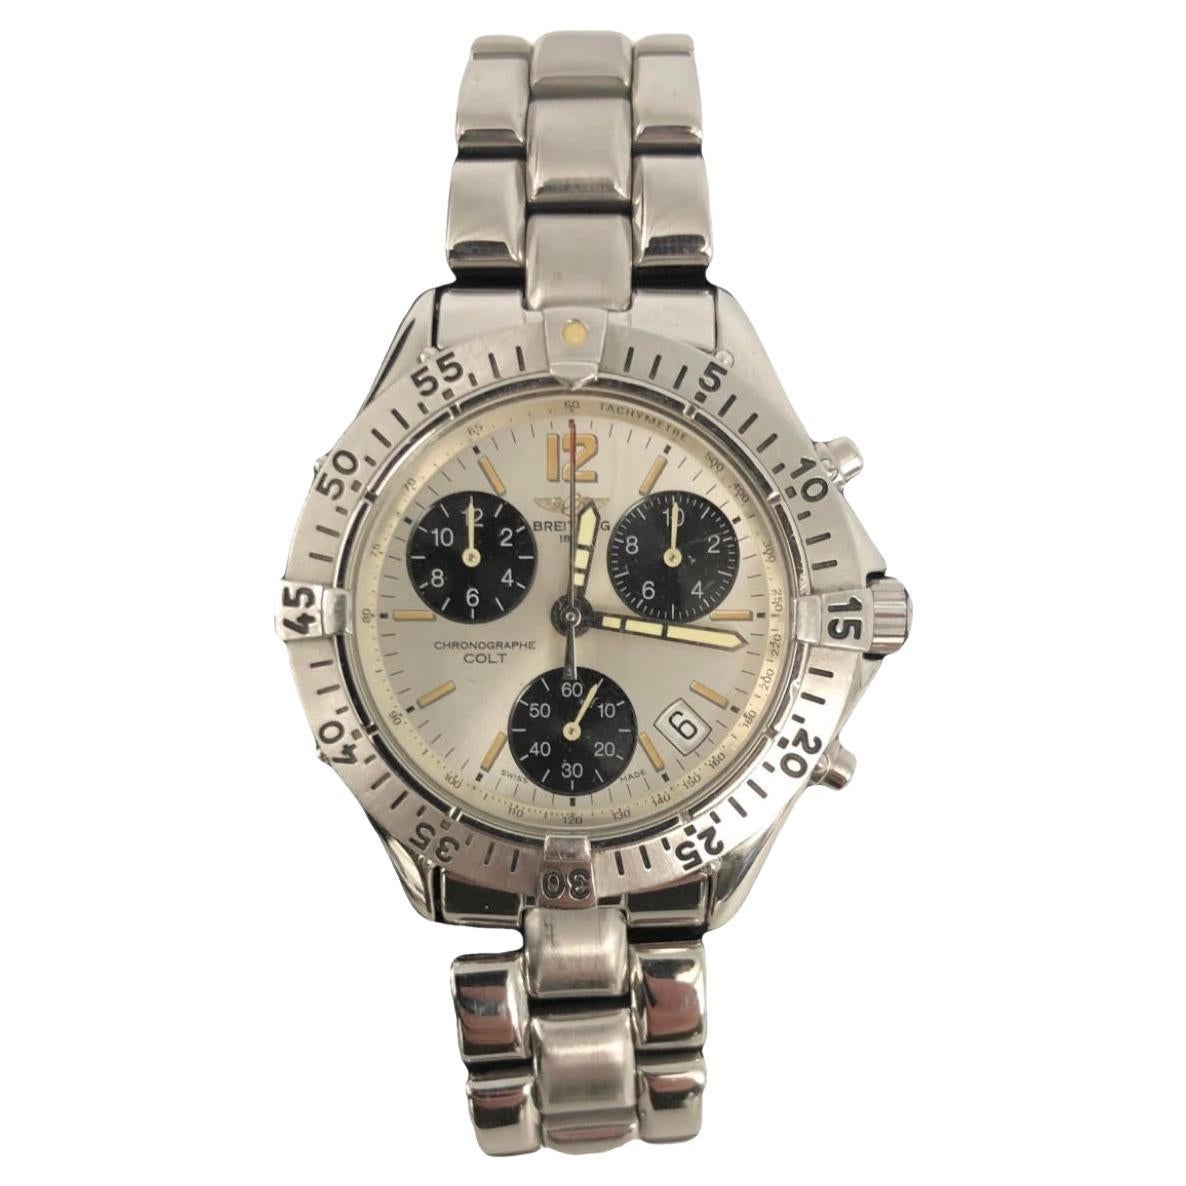 Men’s Breitling Colt Chronograph A53035 Stainless Steel Watch mm